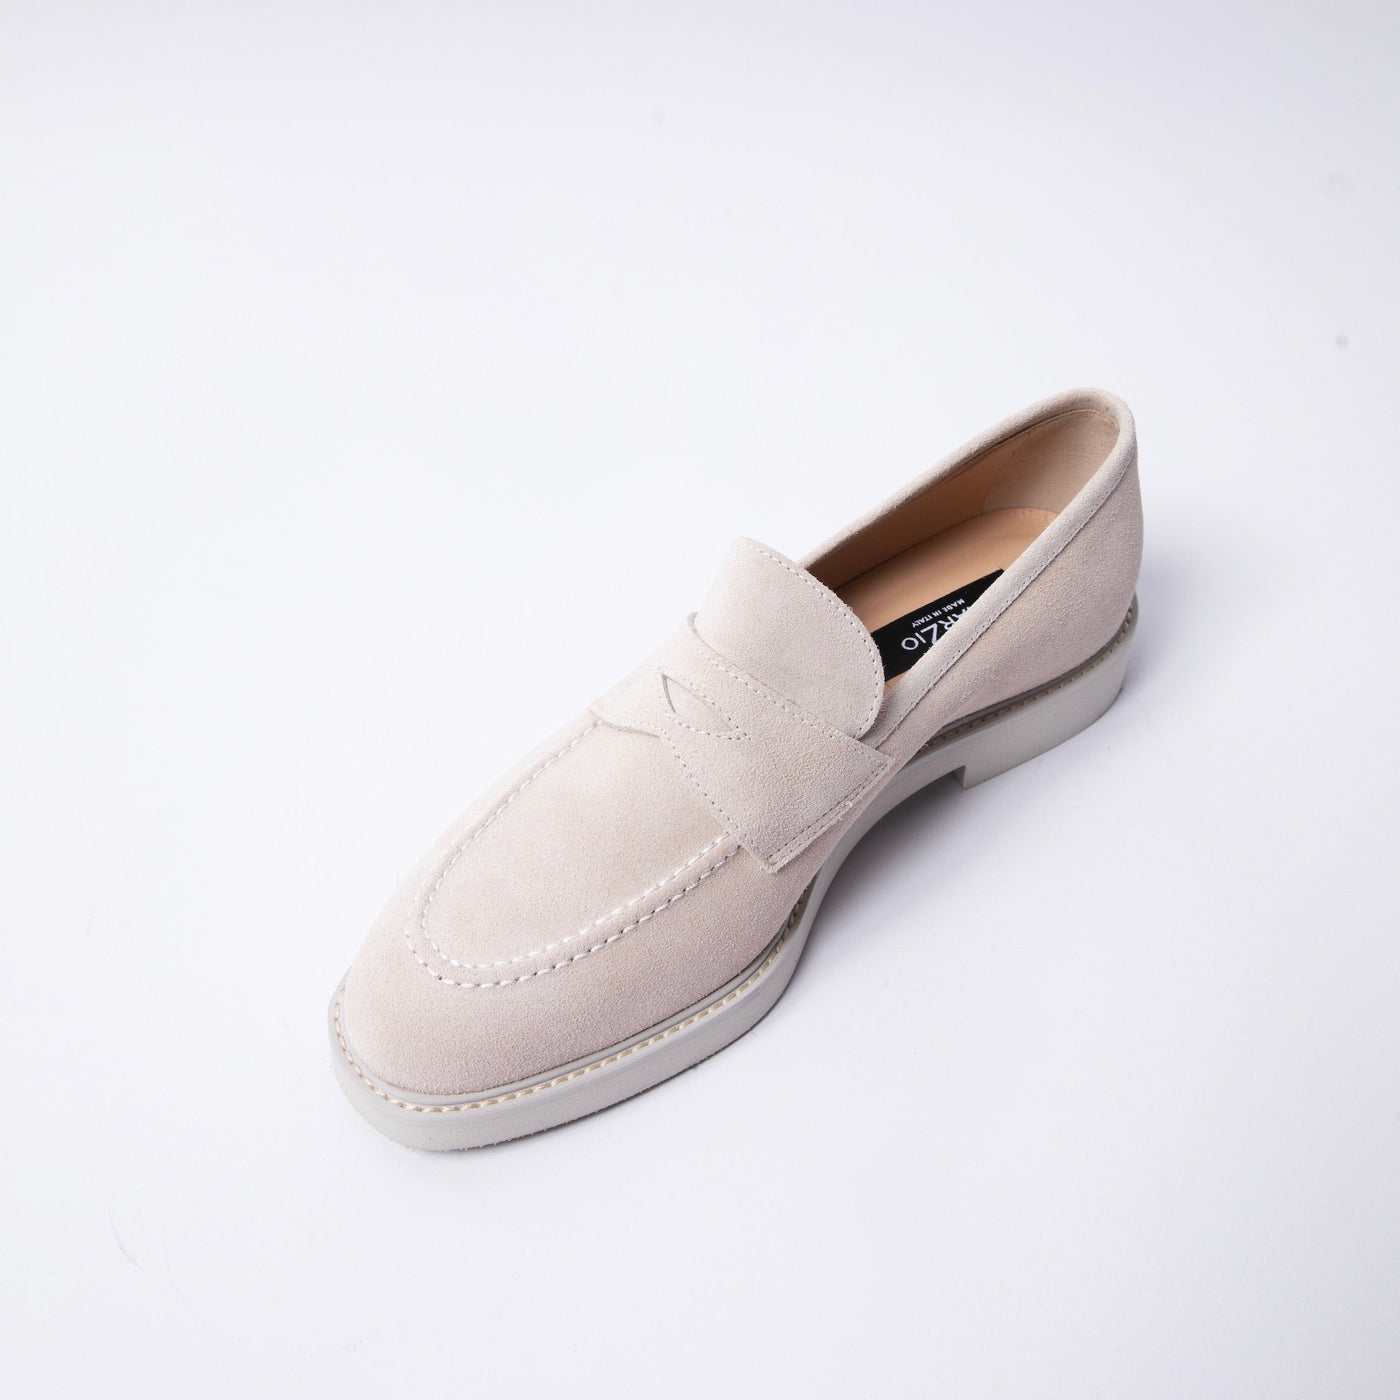 Gomma Penny Loafer in Off-white Suede